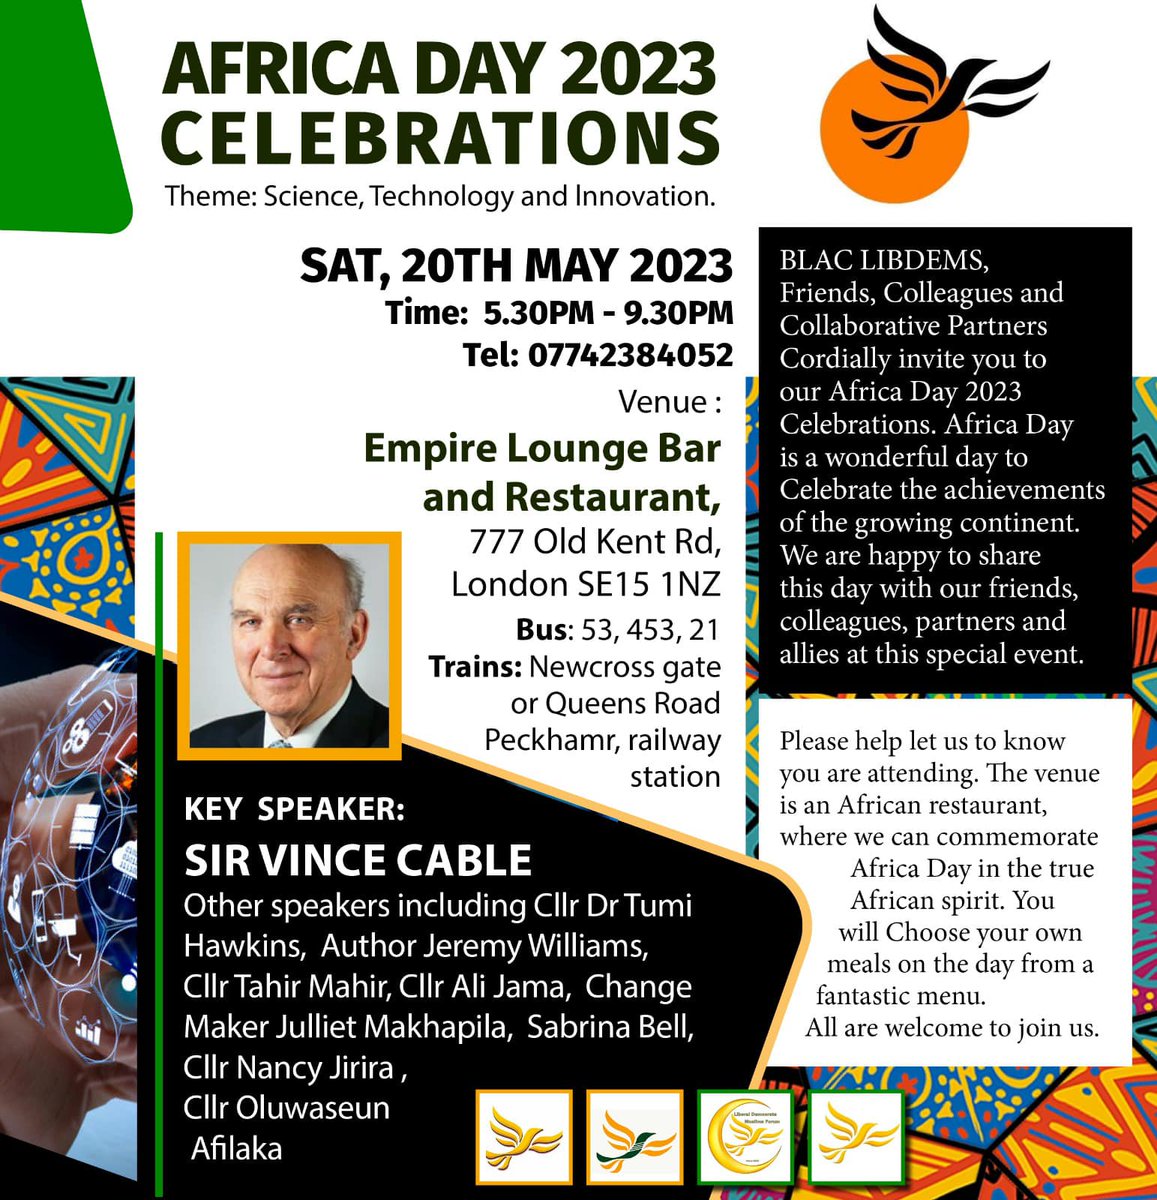 On 20th May we are celebrating #AfricaDay at @empire_lounge, Old Kent Road. Come hear Keynote Speaker @LibDems @vincecable, author @Jeremy_Williams, @CouncillorTumi and more, network and enjoy authentic African food. Message 07742 384052 today to reserve your place.